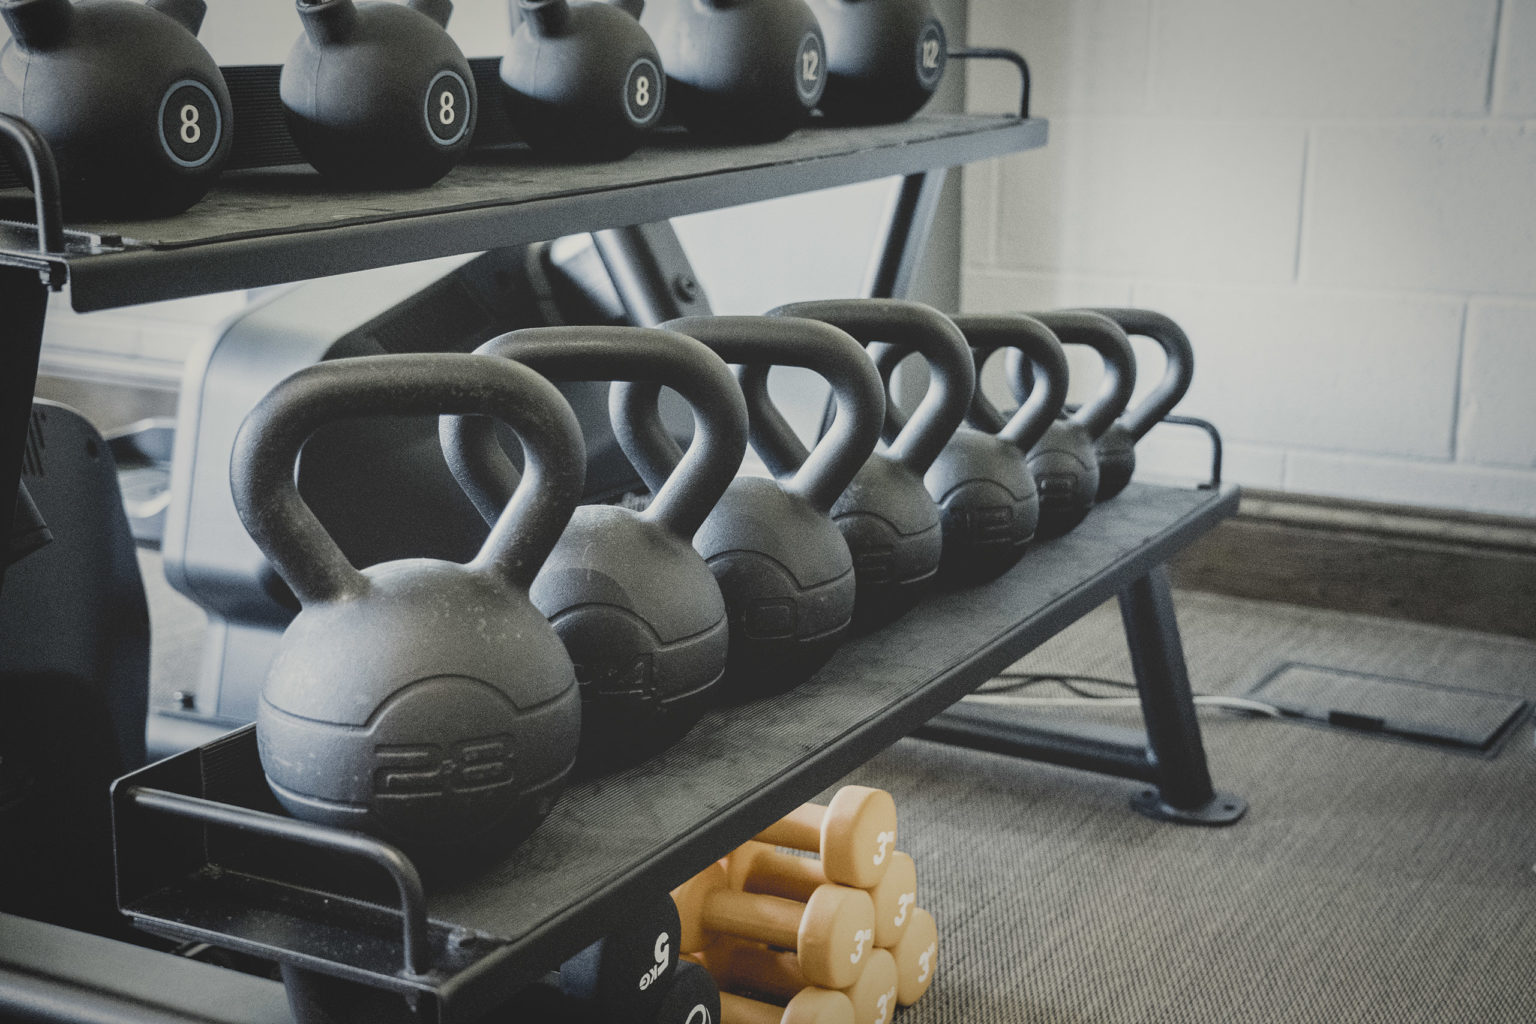 Gym kettle bell weights at Swinton Country Club near Harrogate